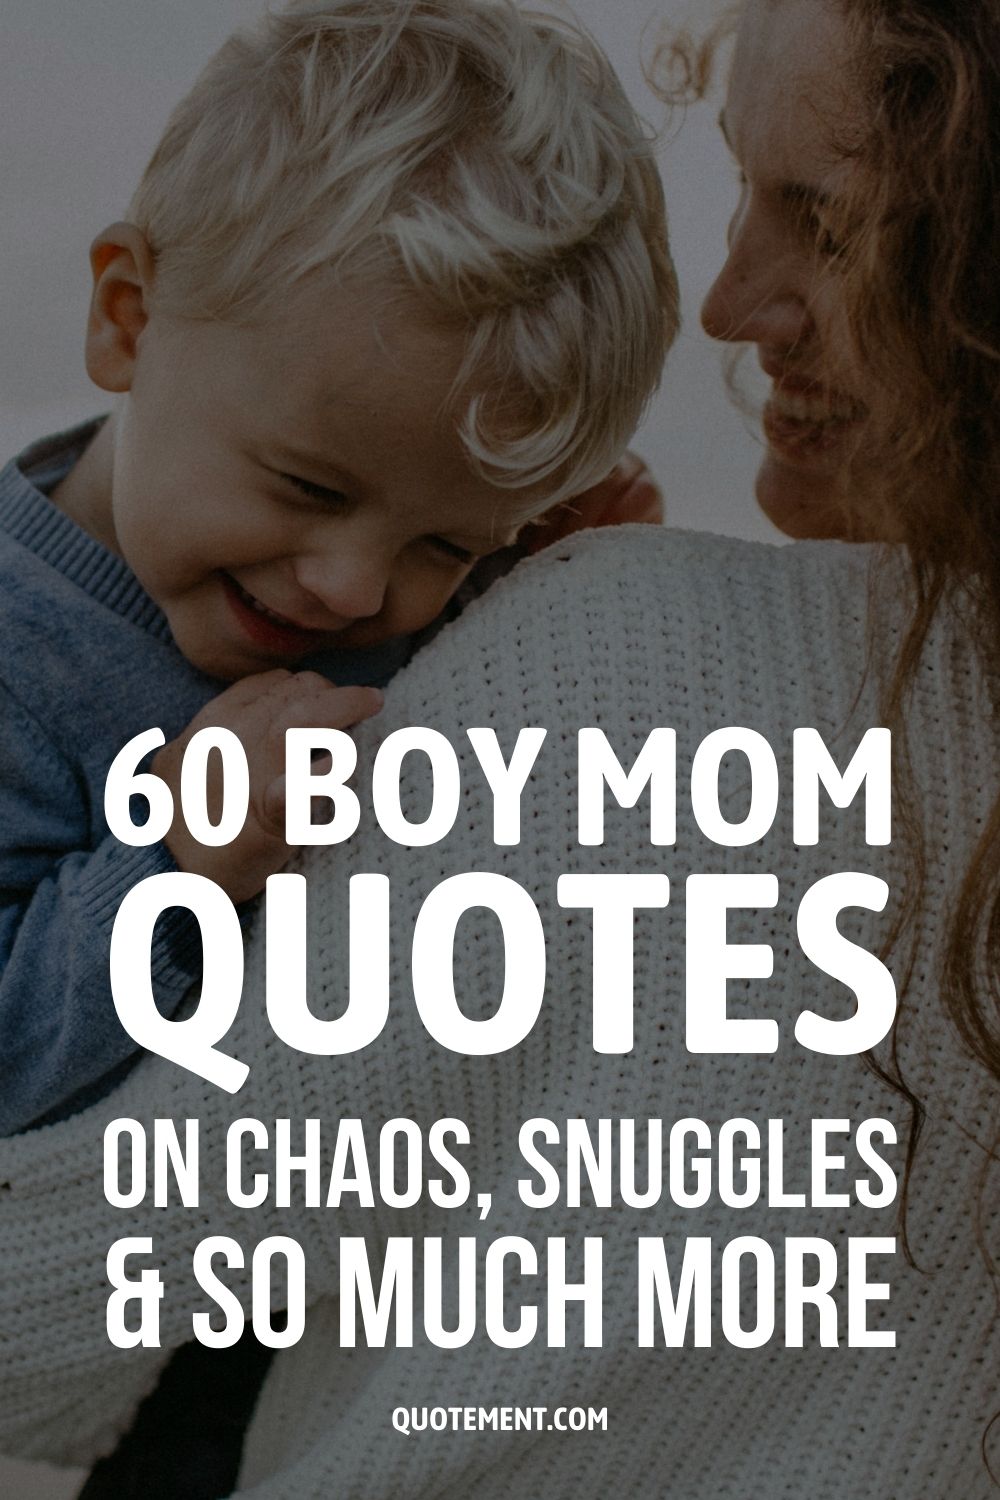 60 Boy Mom Quotes On Chaos, Snuggles, And So Much More
